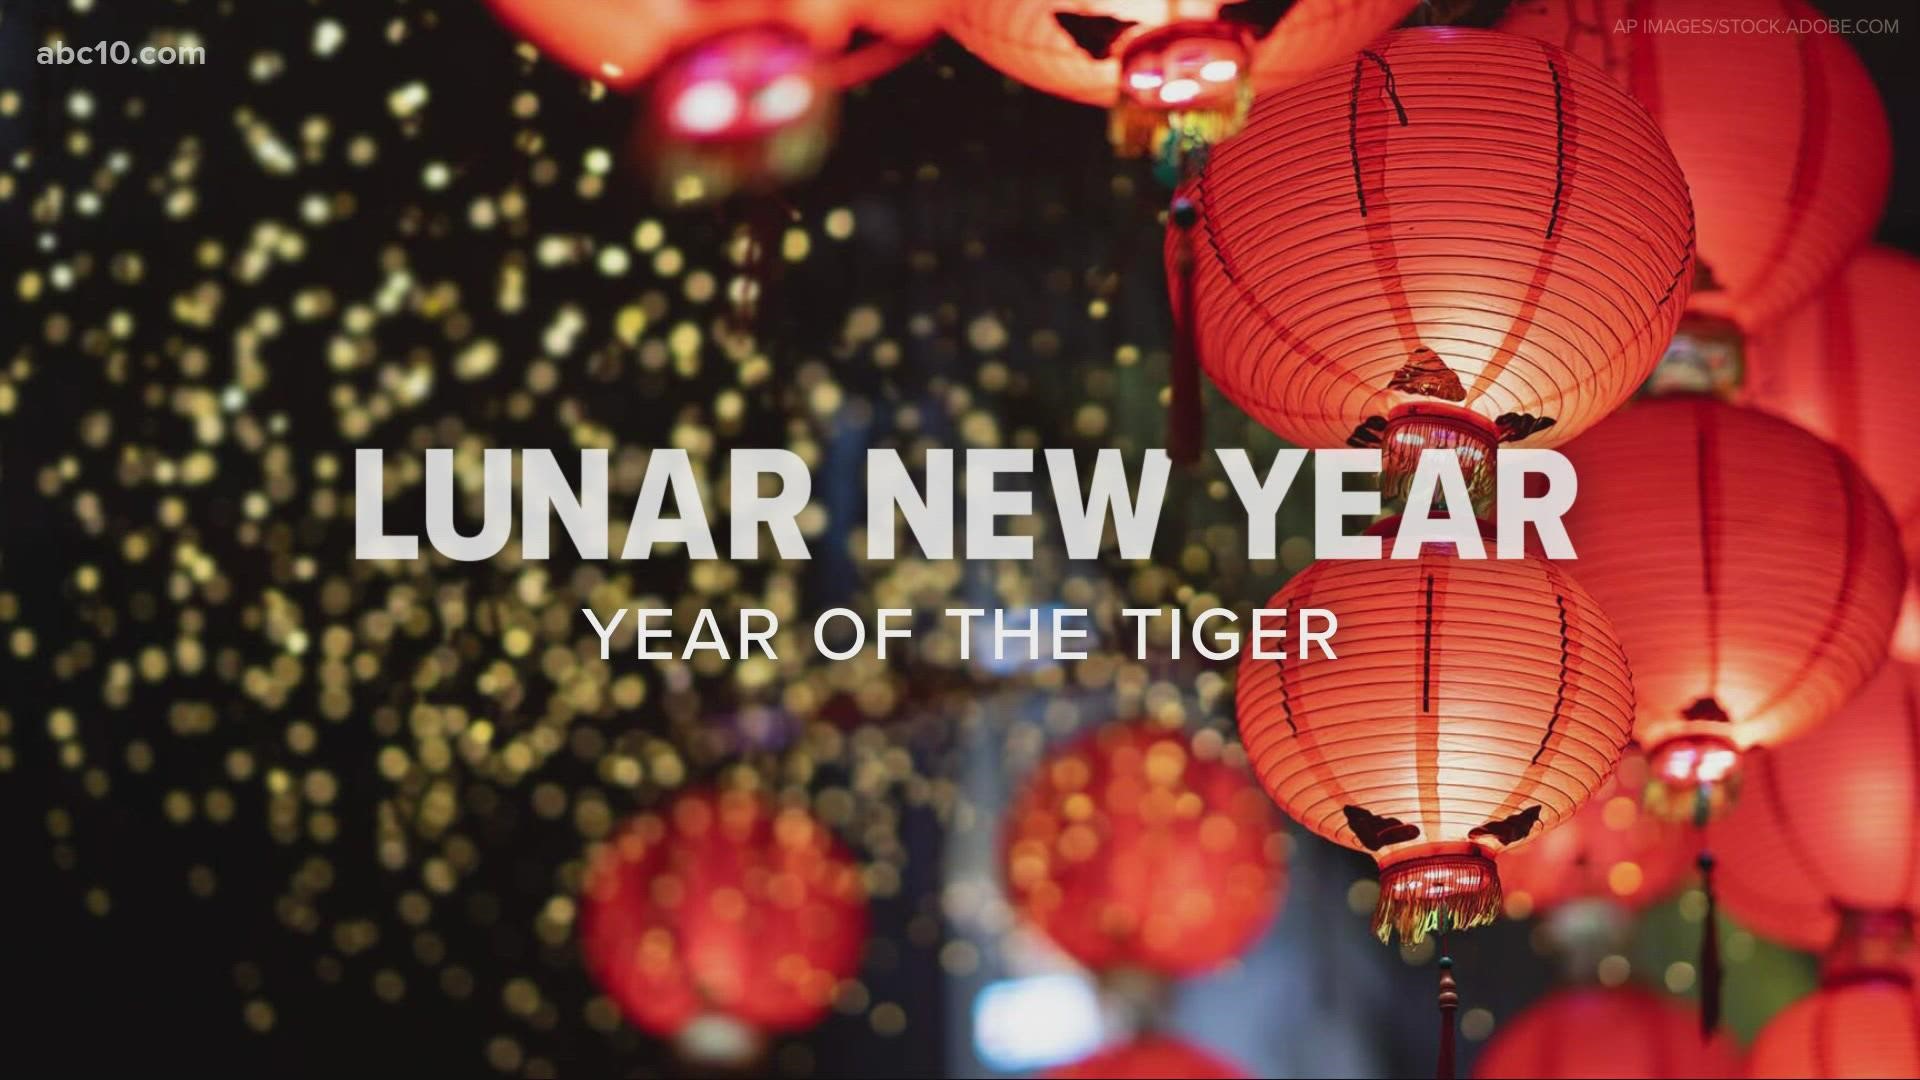 There are plenty of ways you can usher in the Year of the Tiger.